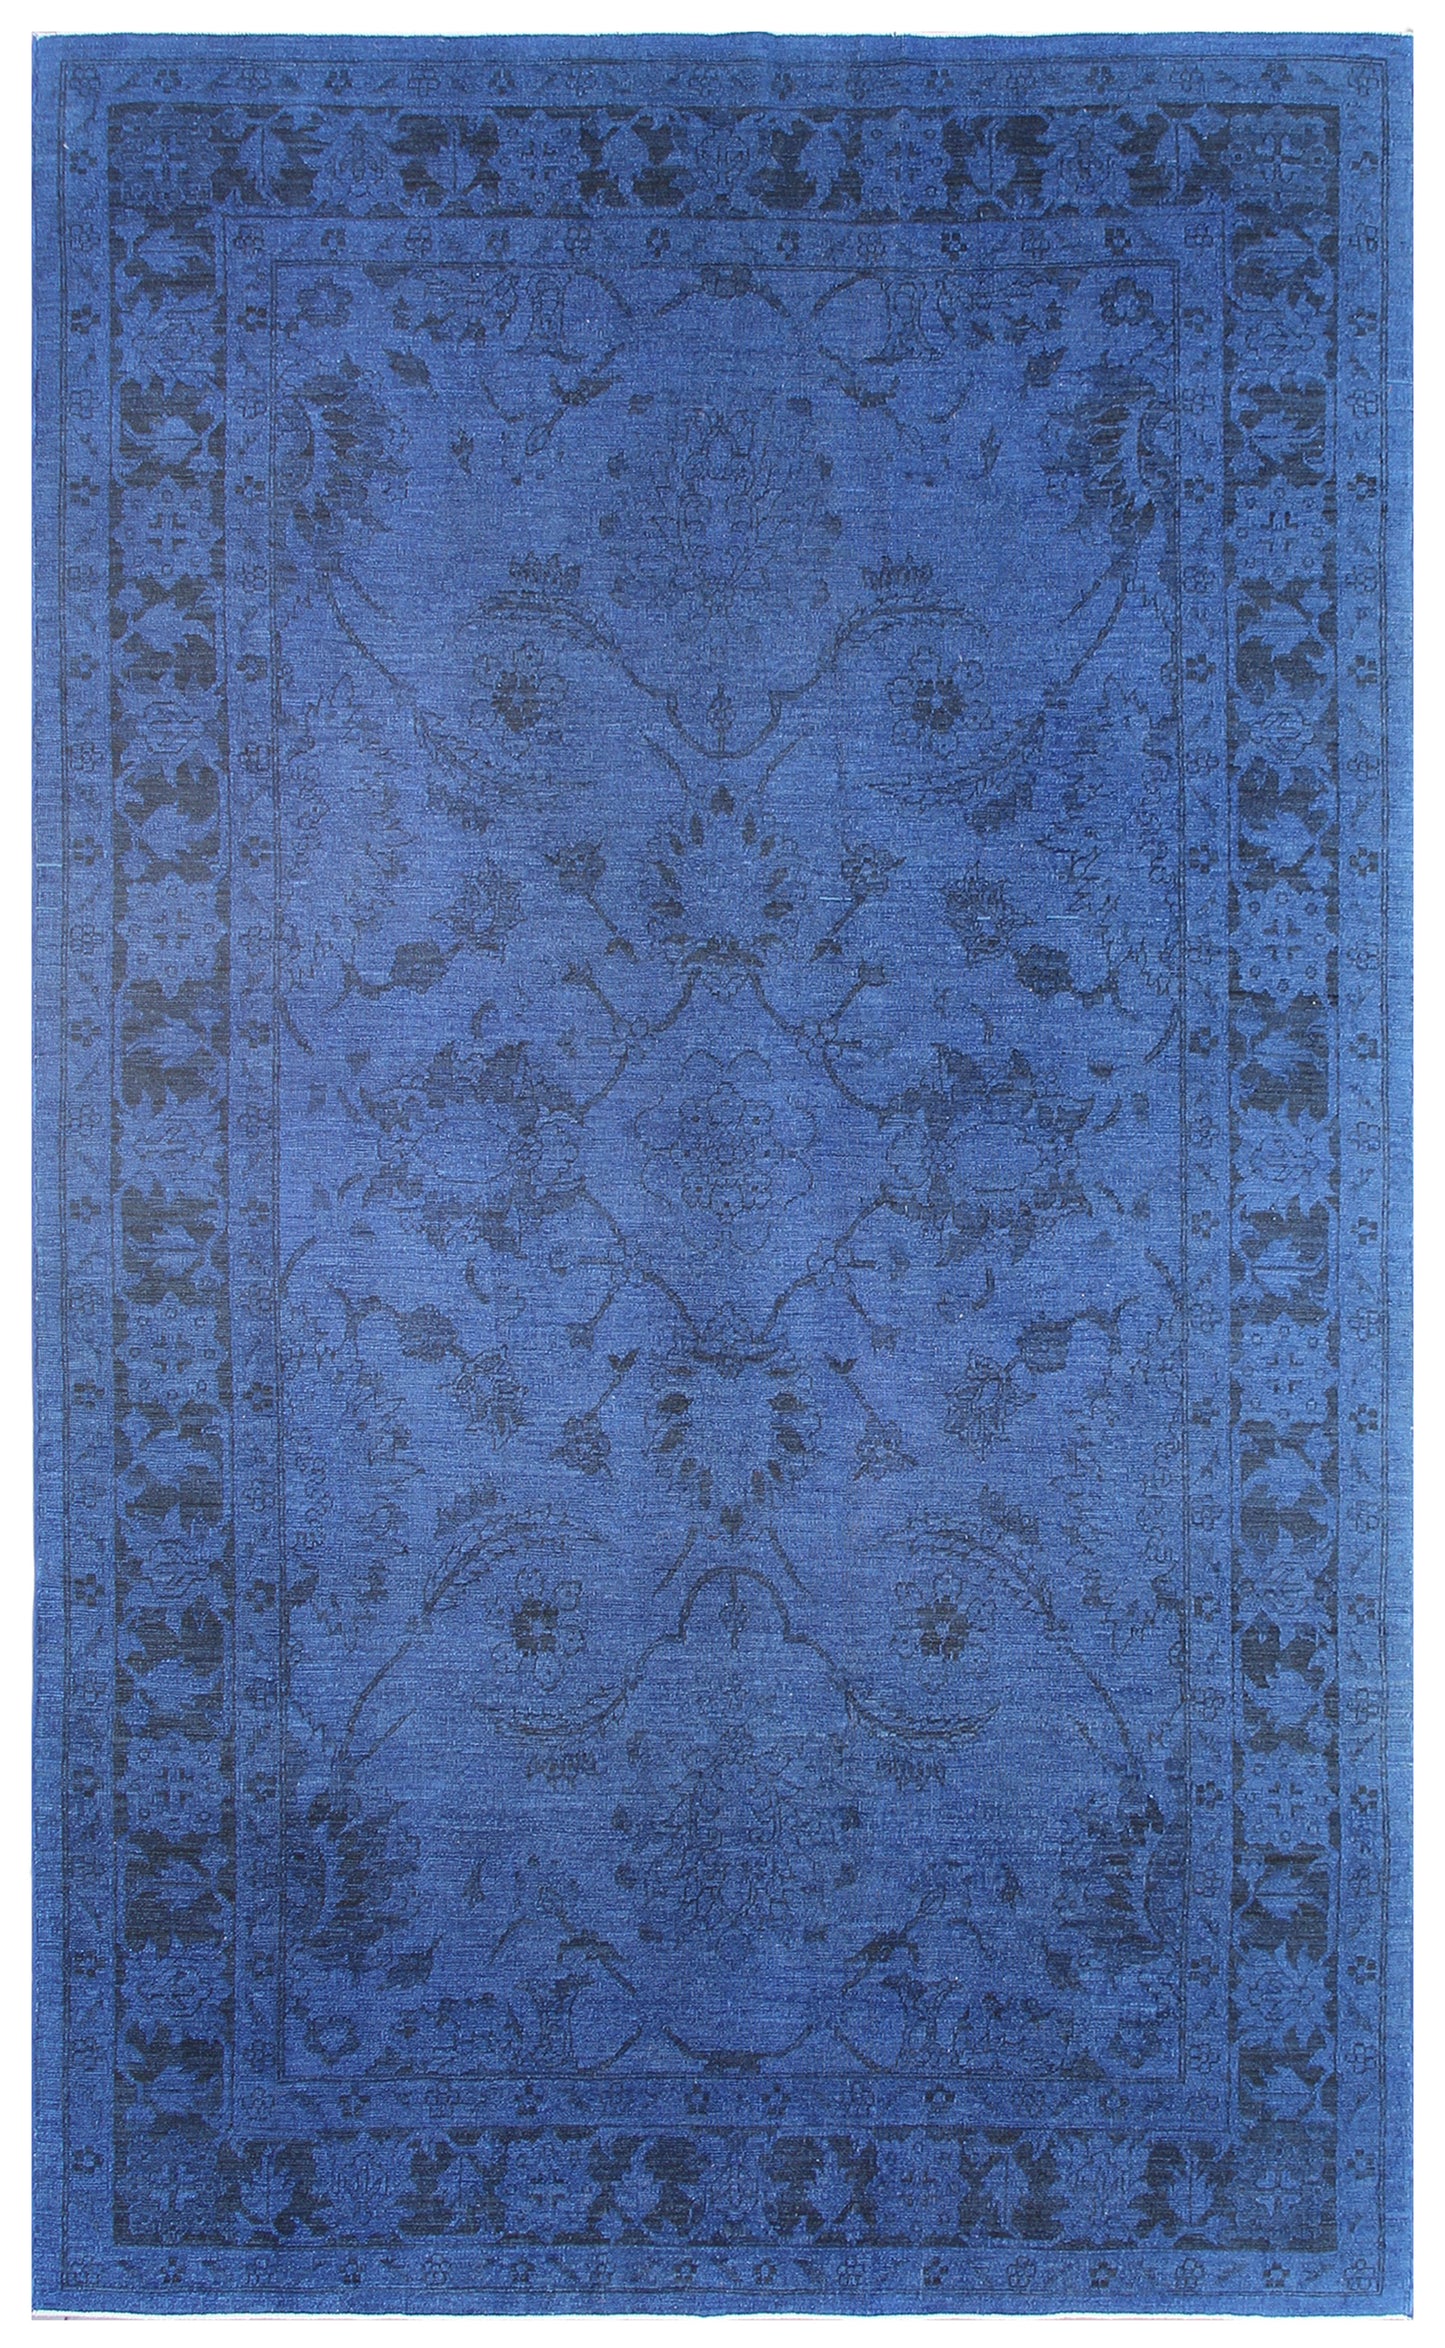 6'x9' Blue Persian Sultanabad Design Ariana Overdyed Rug